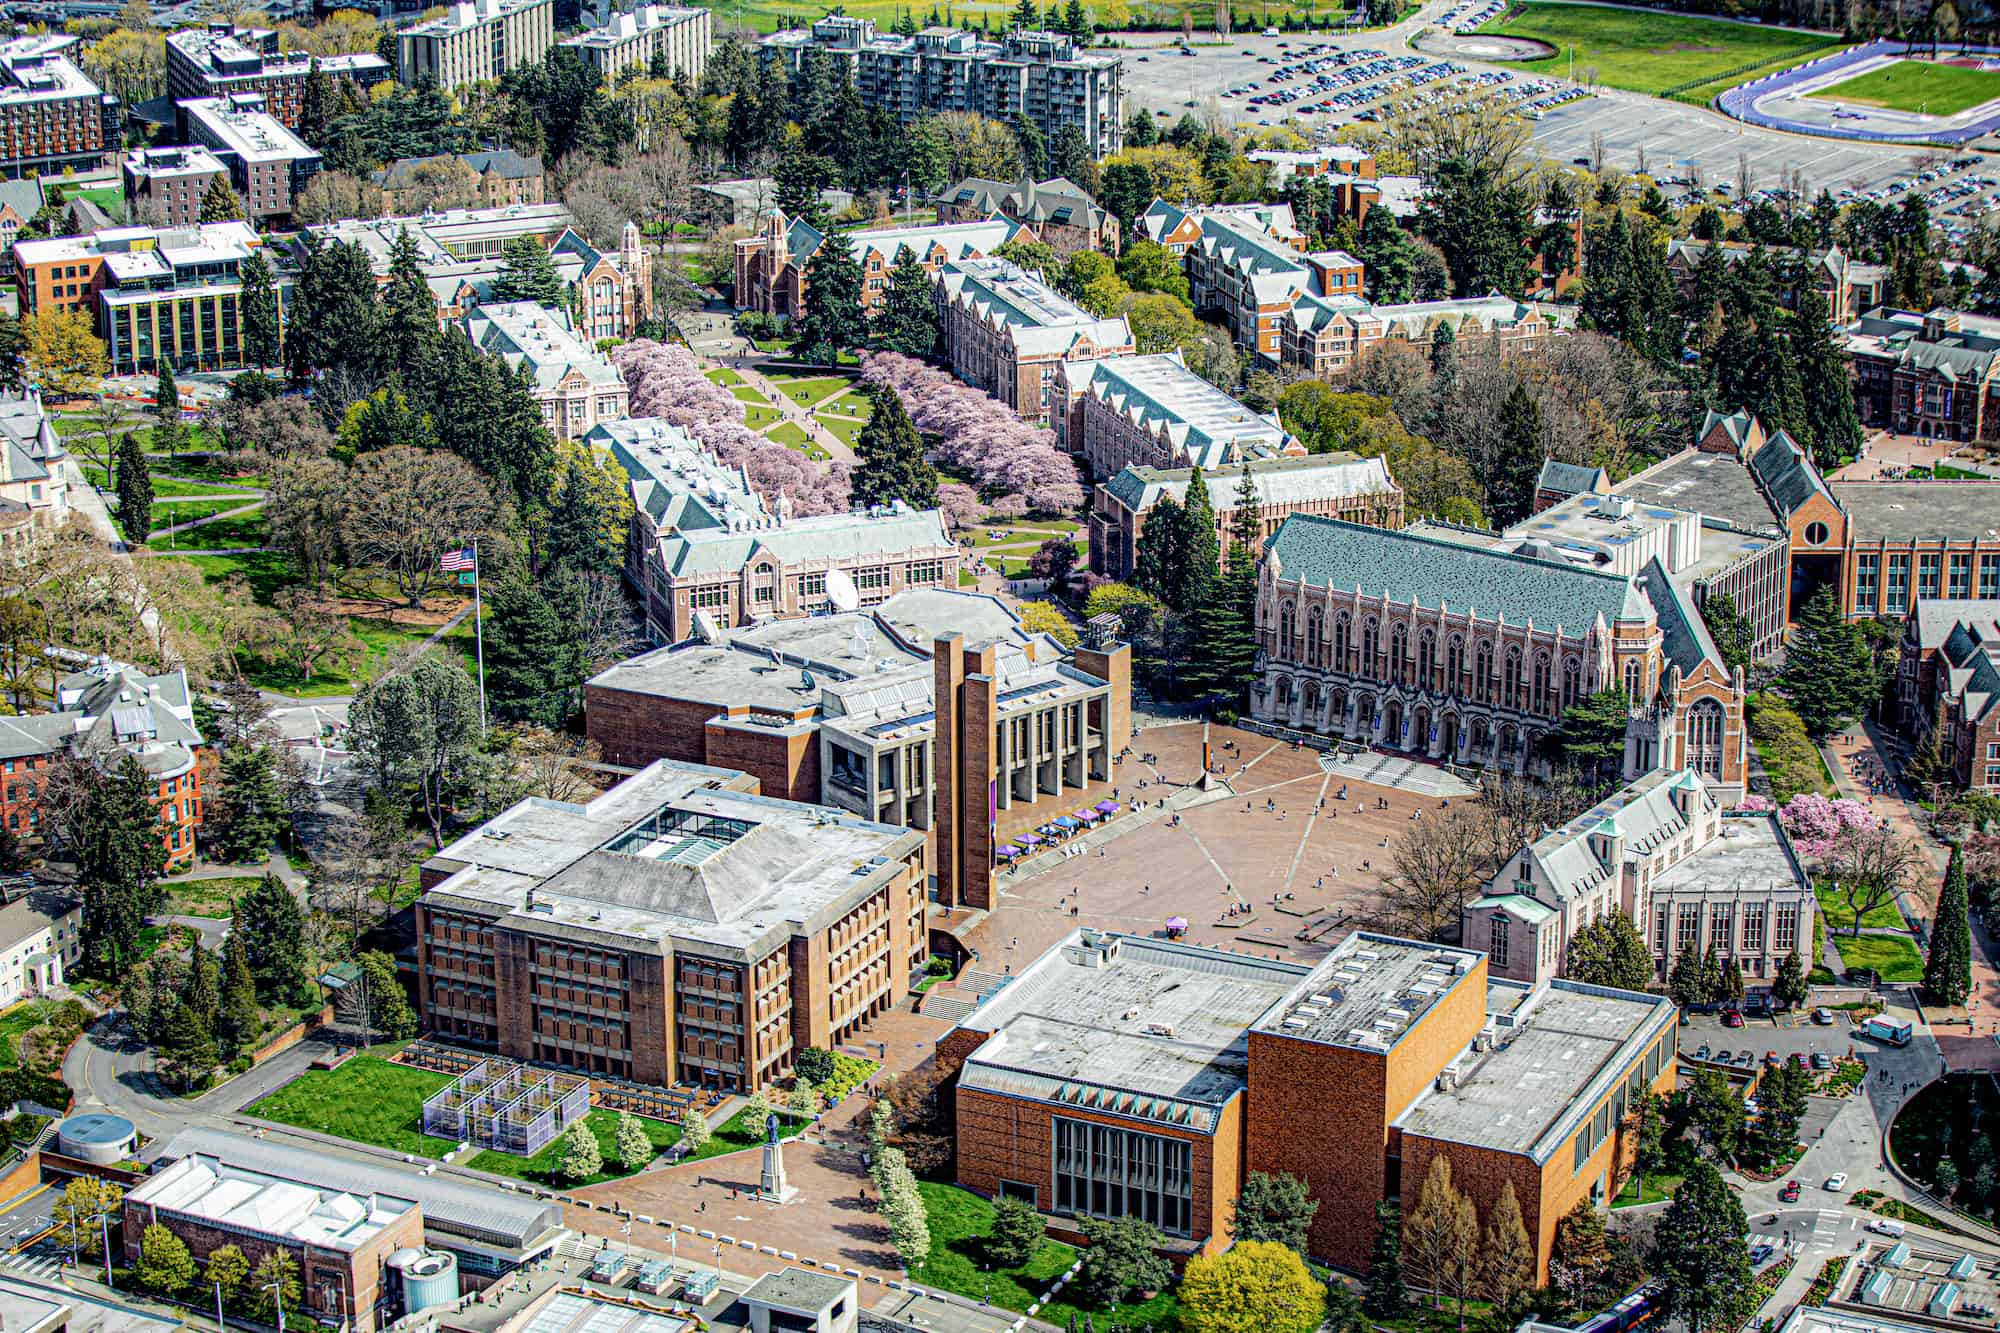 Aerial view of University of Washington campus, Red Square is at center, with The Quad at the top, cherry trees in bloom